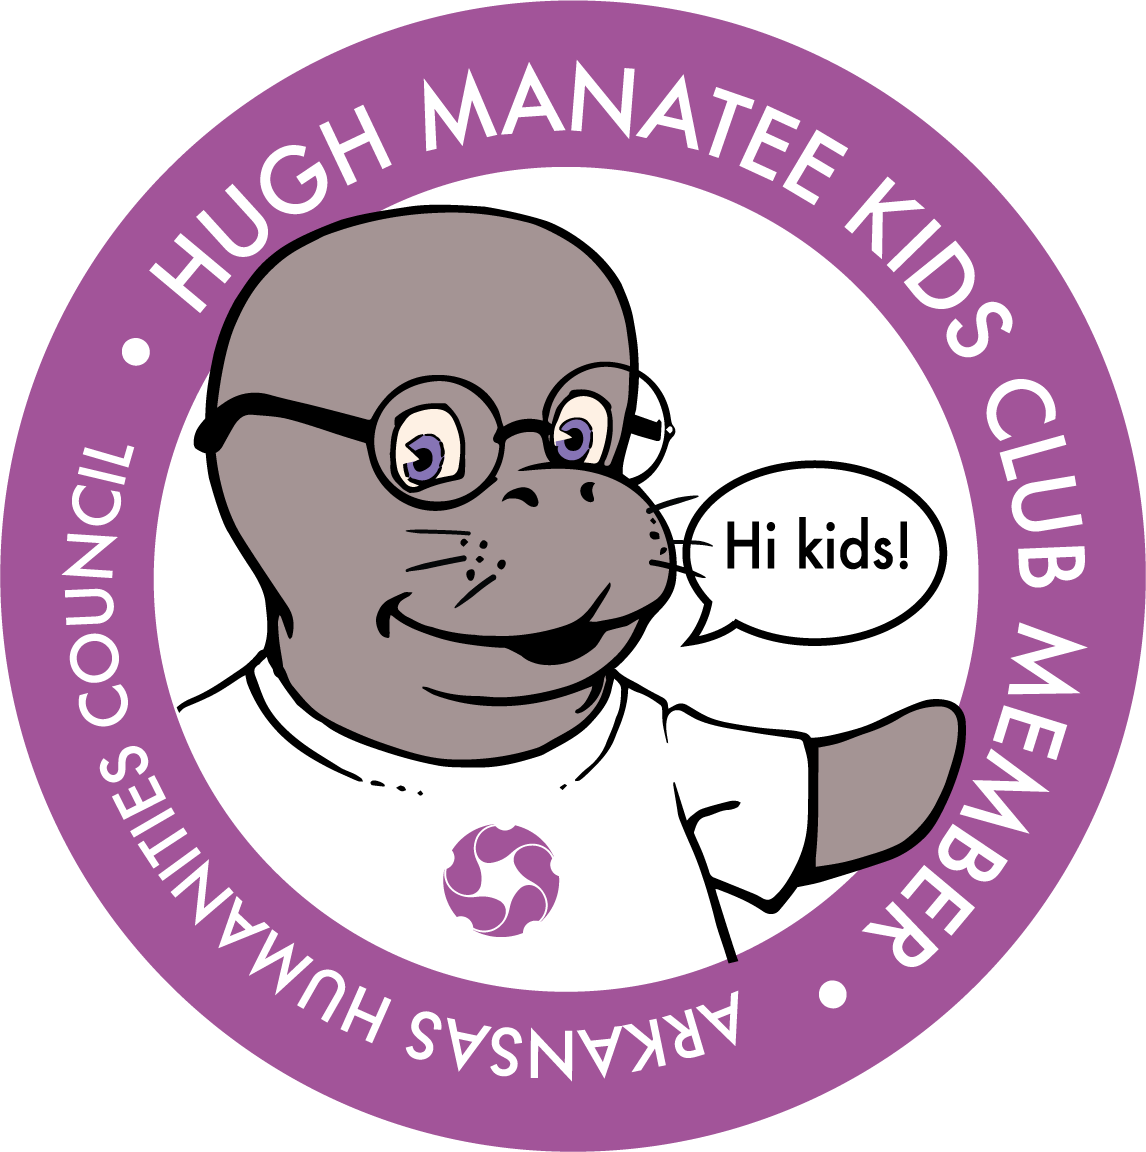 A circular sticker with a manatee wearing glasses and a t-shirt with the HumanitiesAR logo on it. Next to the manatee's mouth is a speech bubble with the text "Hi kids!" And on the edge of the circle is the text: "Hugh Manatee Kids Club member / HumanitiesAR"